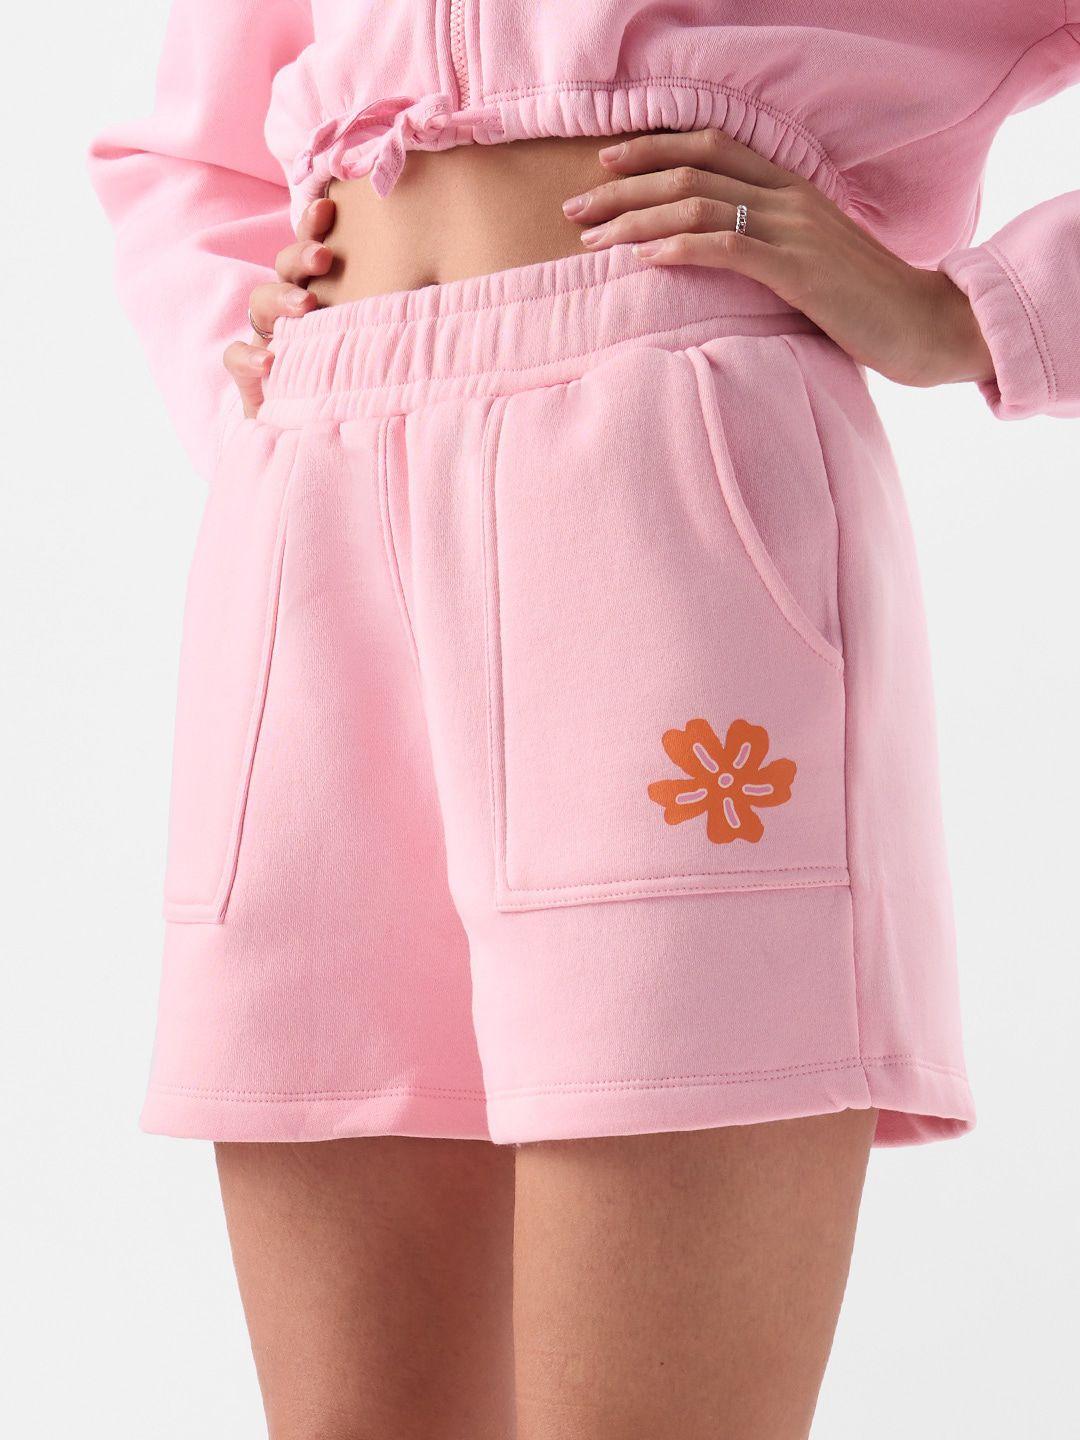 the souled store women pink floral printed shorts